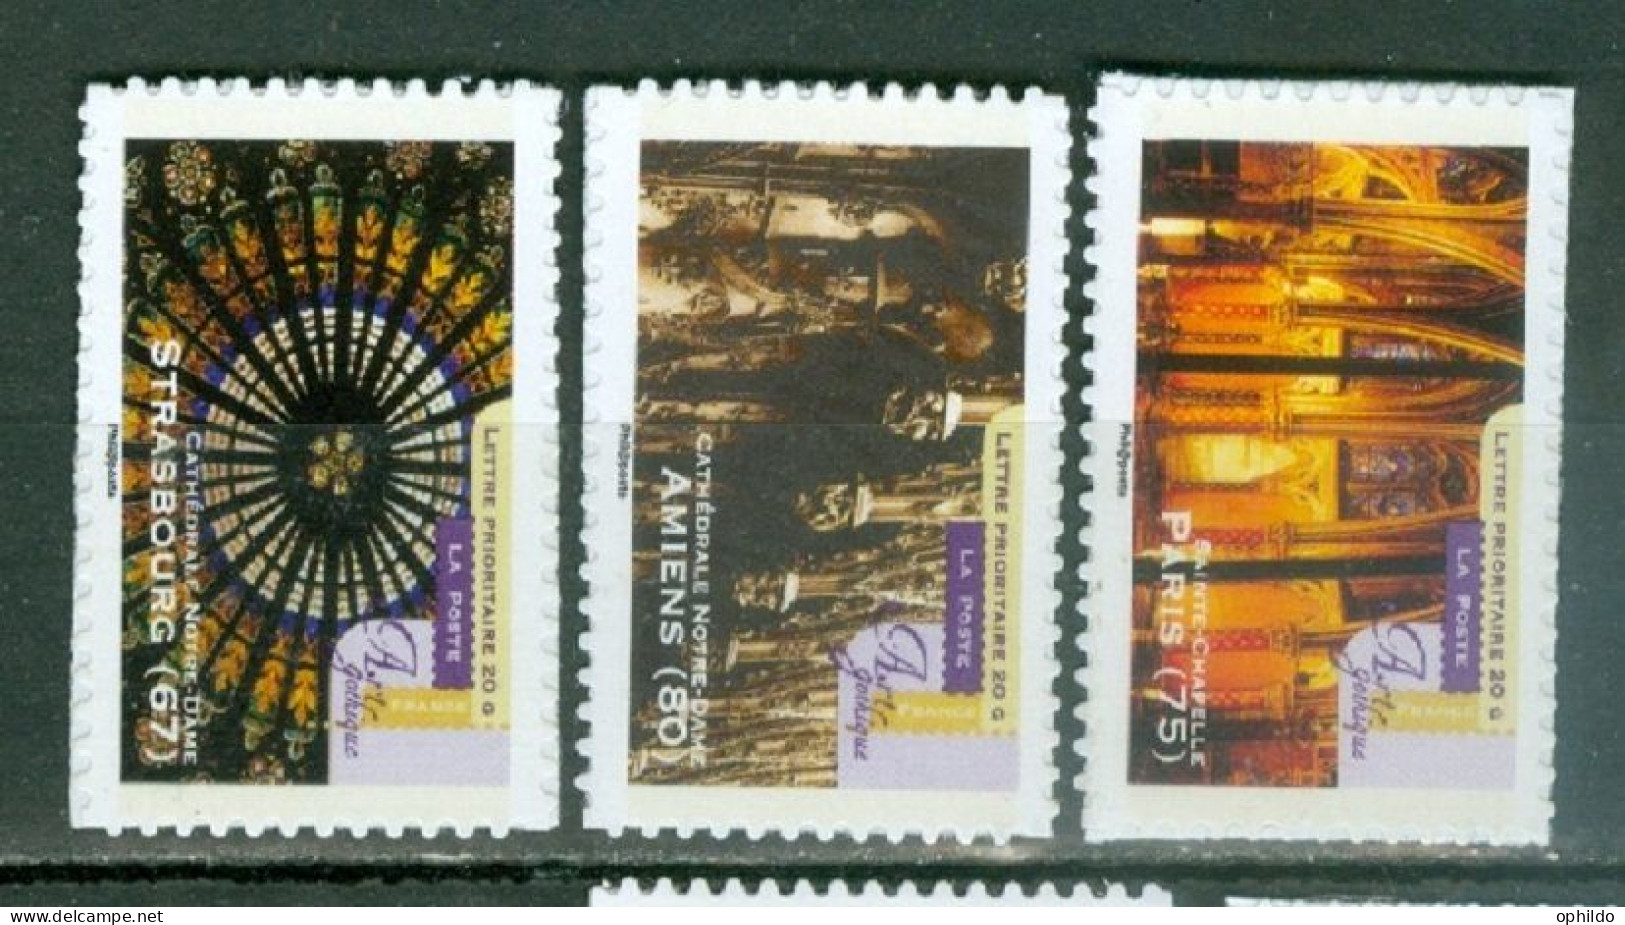 France 558a, 559a Et 562a * * TB - Unused Stamps